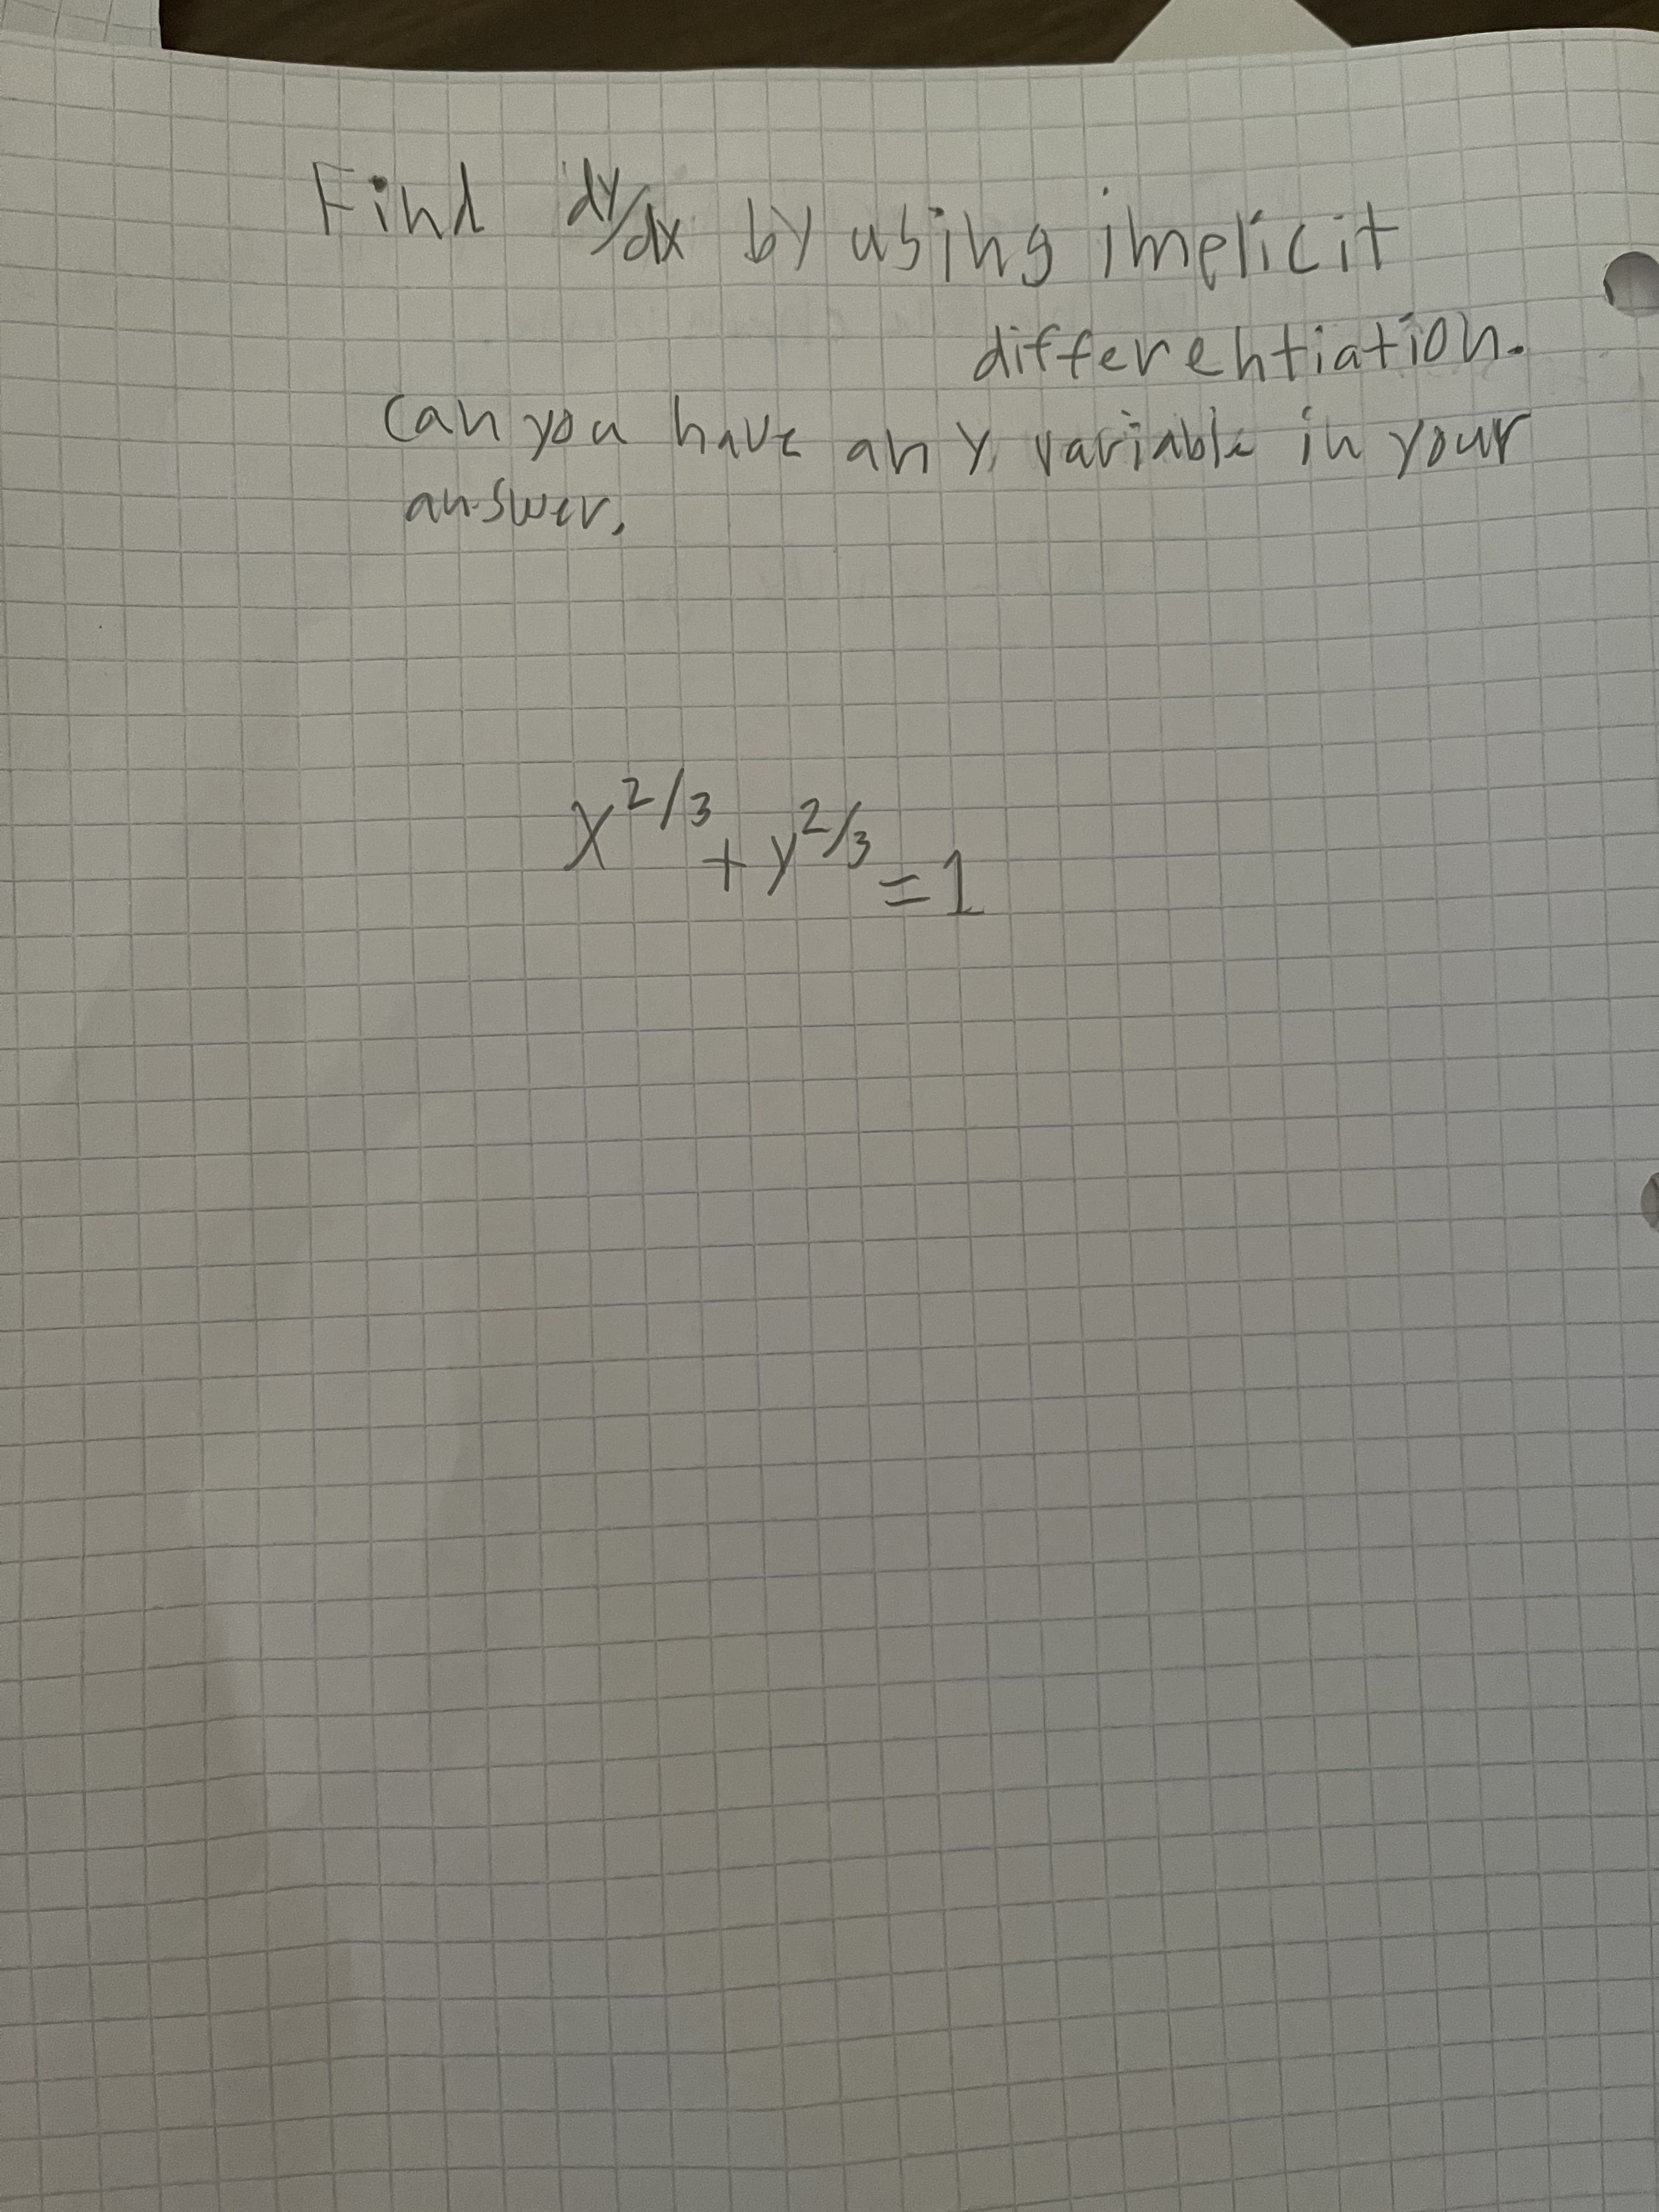 differentiation-
Can you have an y variable in your
answer,
